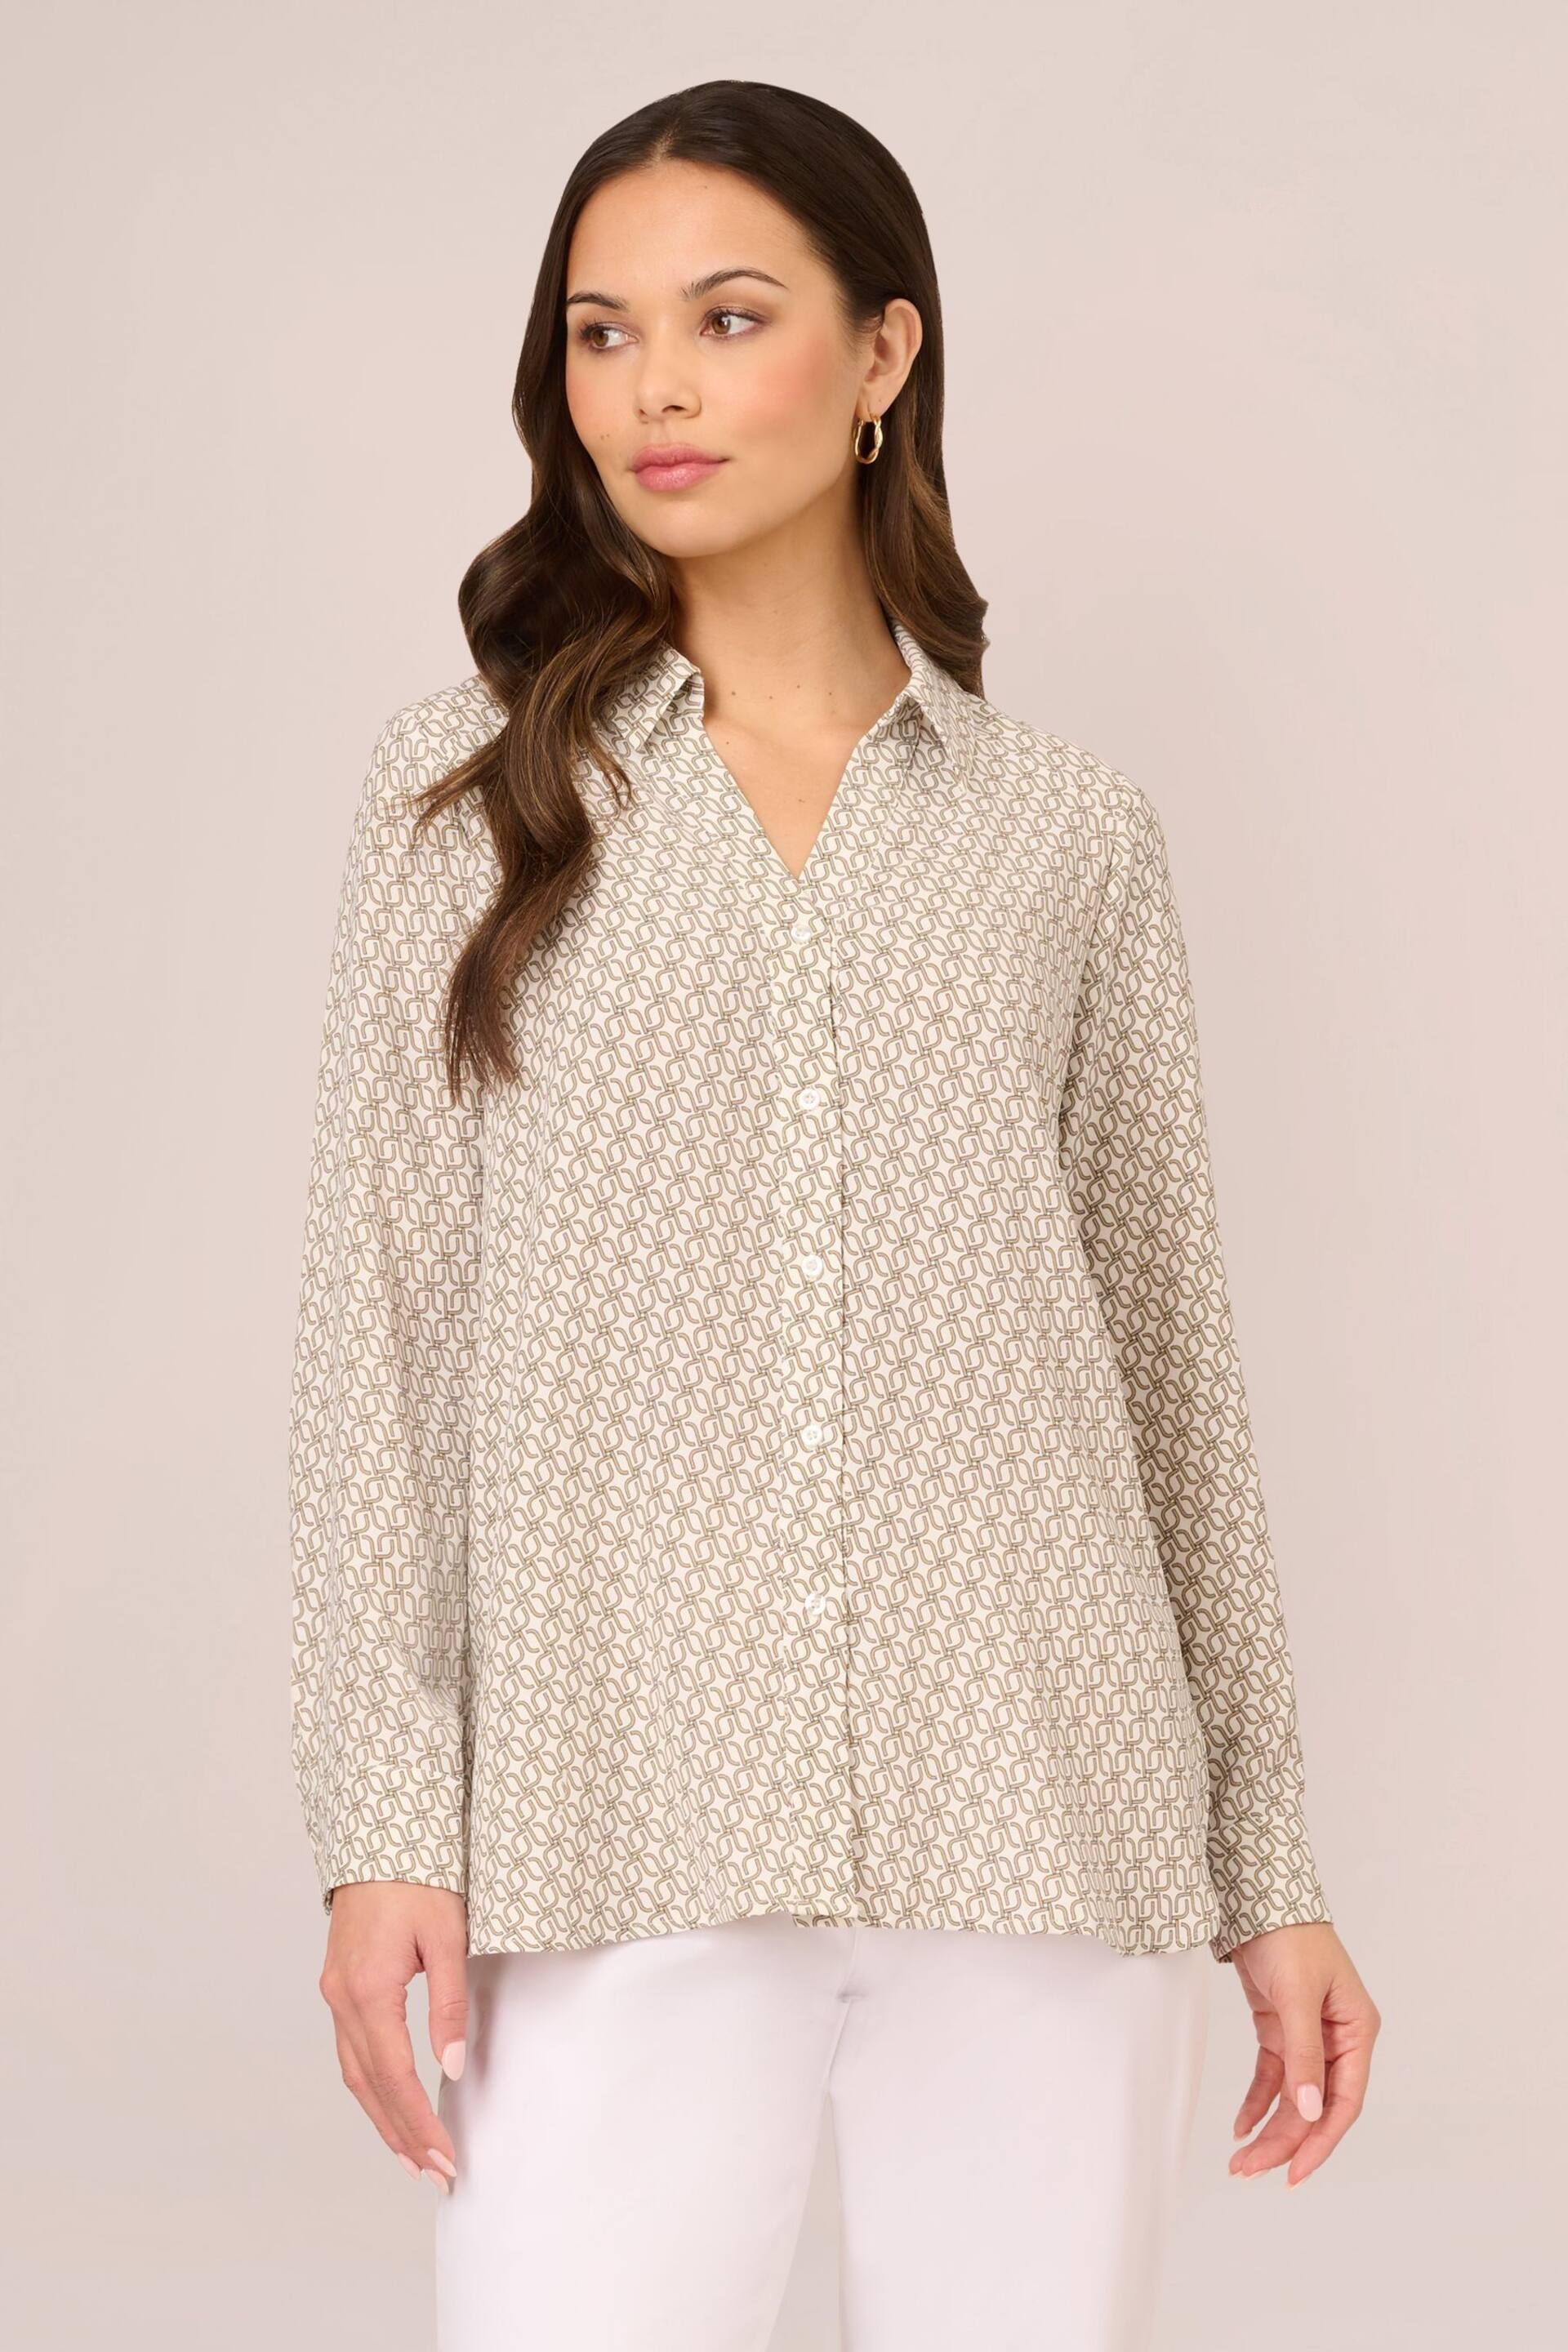 Adrianna Papell Natural Printed Texture Airflow Woven Long Sleeve V-Collar Shirt - Image 1 of 7